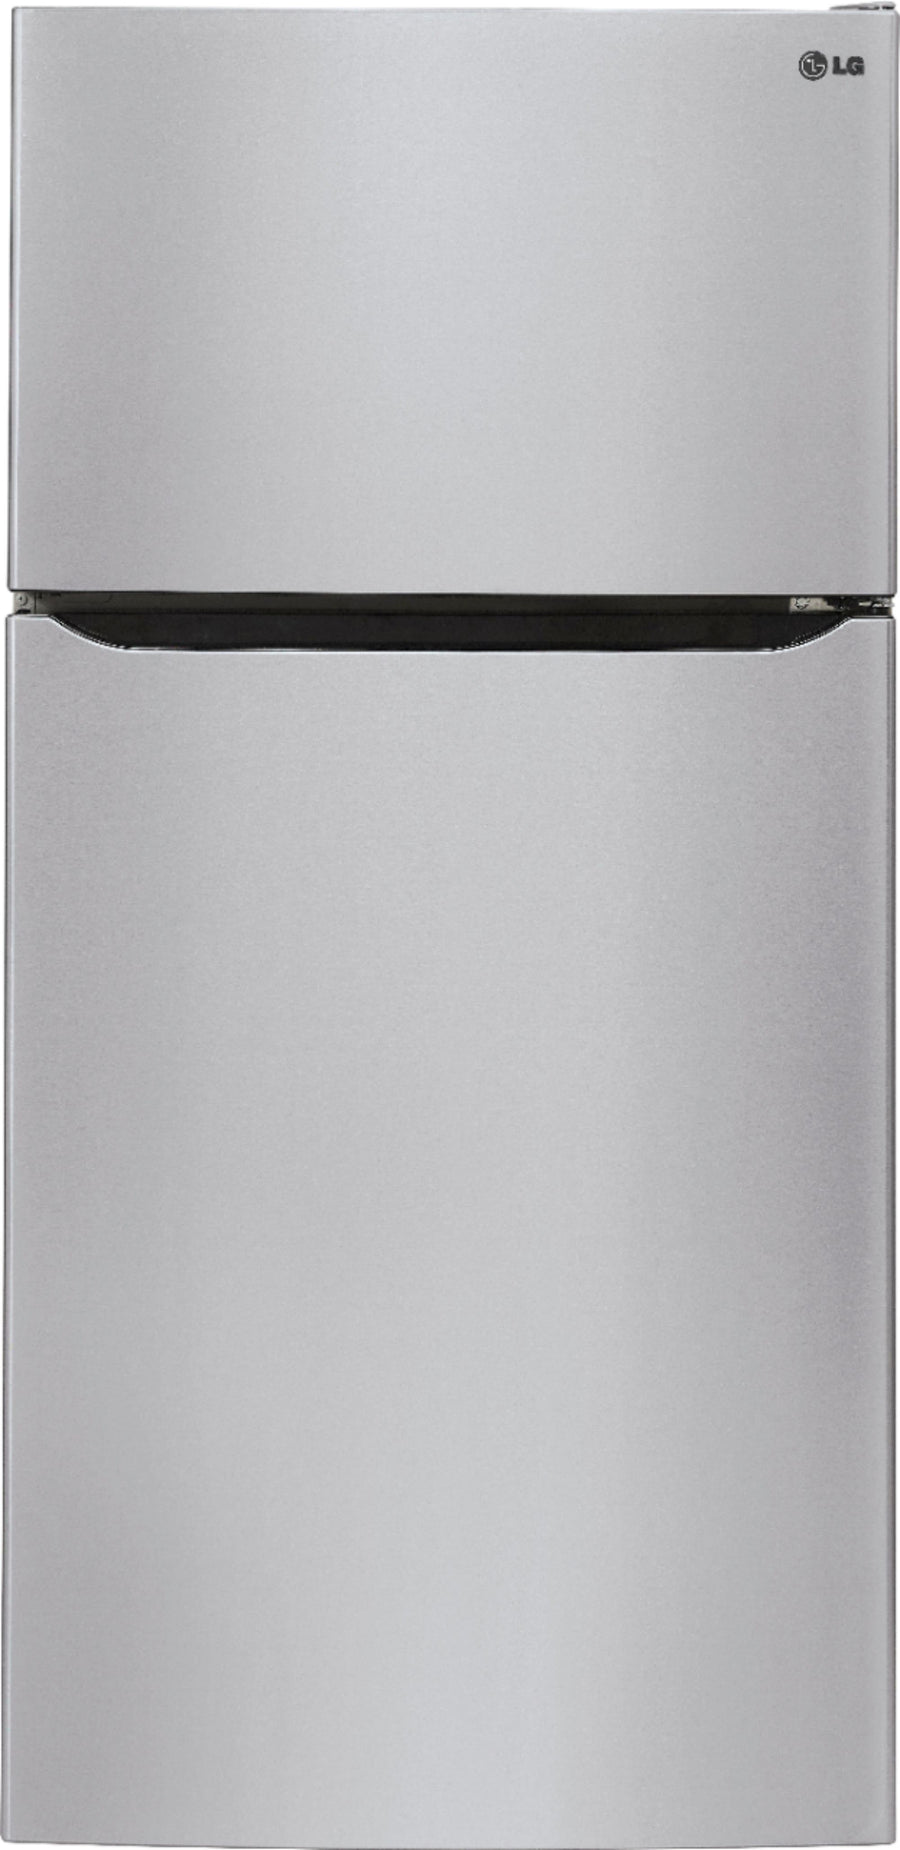 LG - 23.8 Cu. Ft. Top-Freezer Refrigerator with Ice Maker - Stainless Steel_0